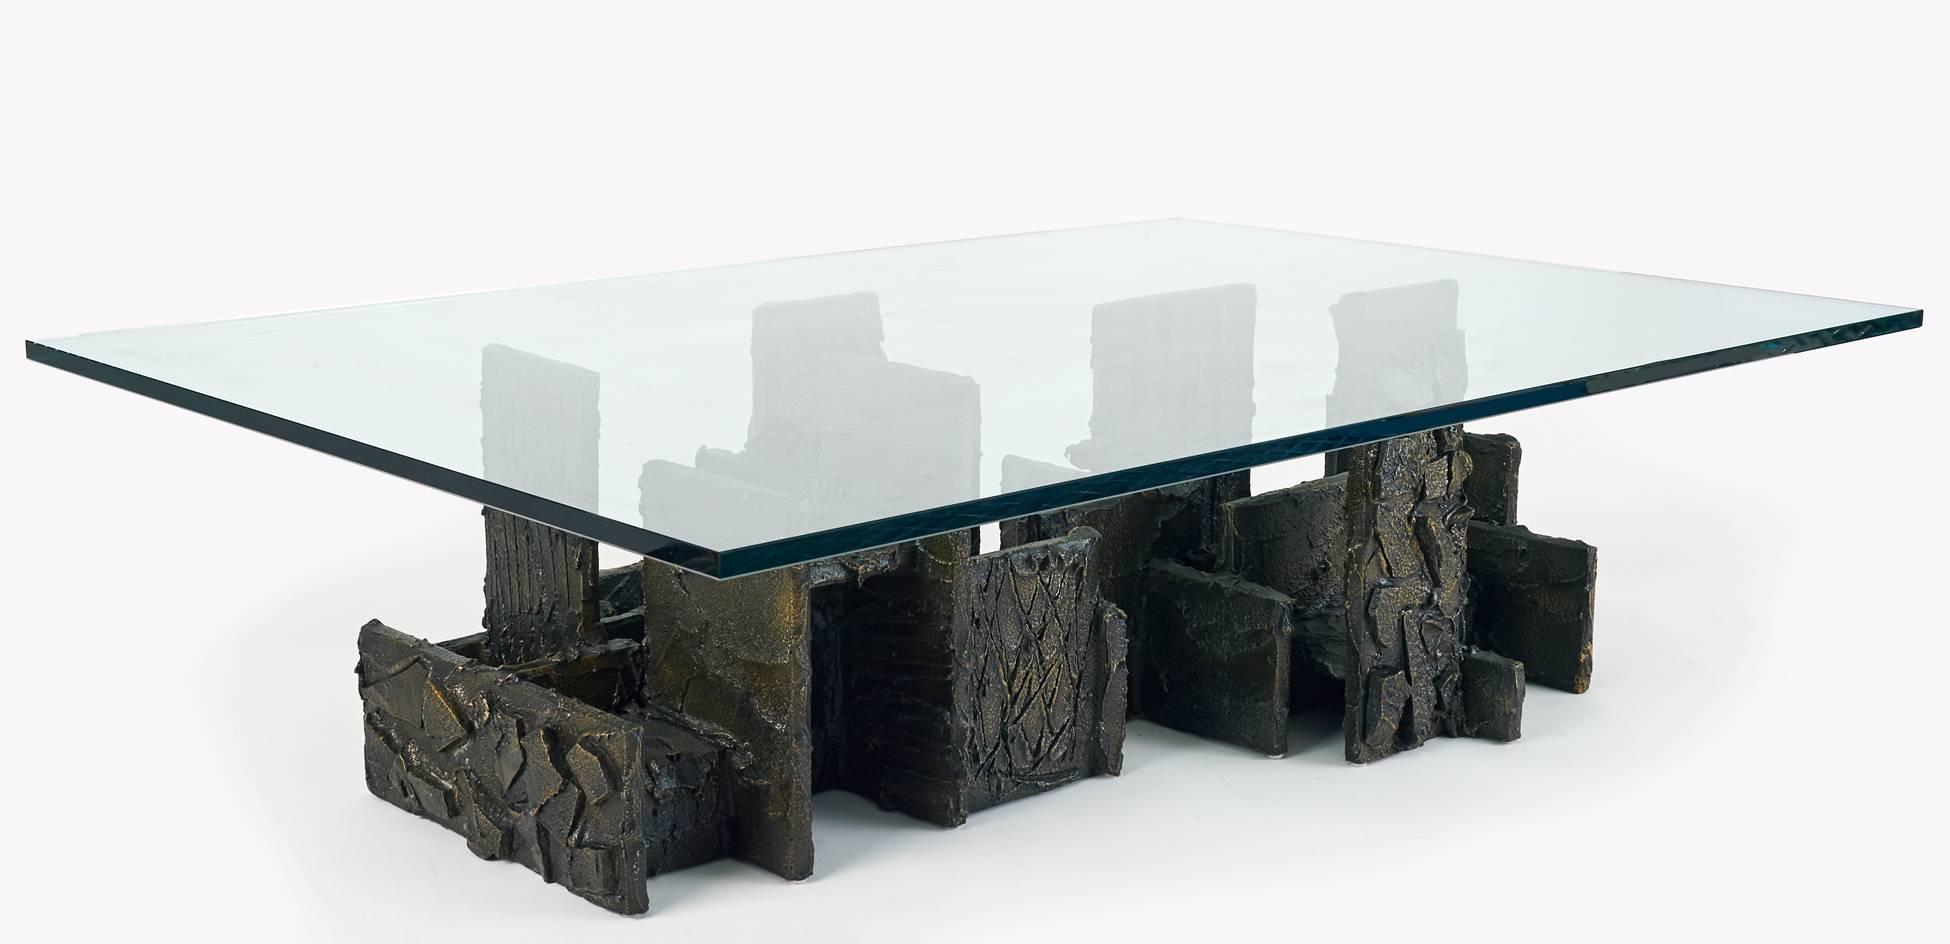 Paul Evans (1931–1987)

A sculptural brutalist coffee table by Studio Craft Movement leader Paul Evans, in bronze. The architectural base —comprised of textural interlocking facets vigorously hand sculpted with contrasting motifs— rises like a